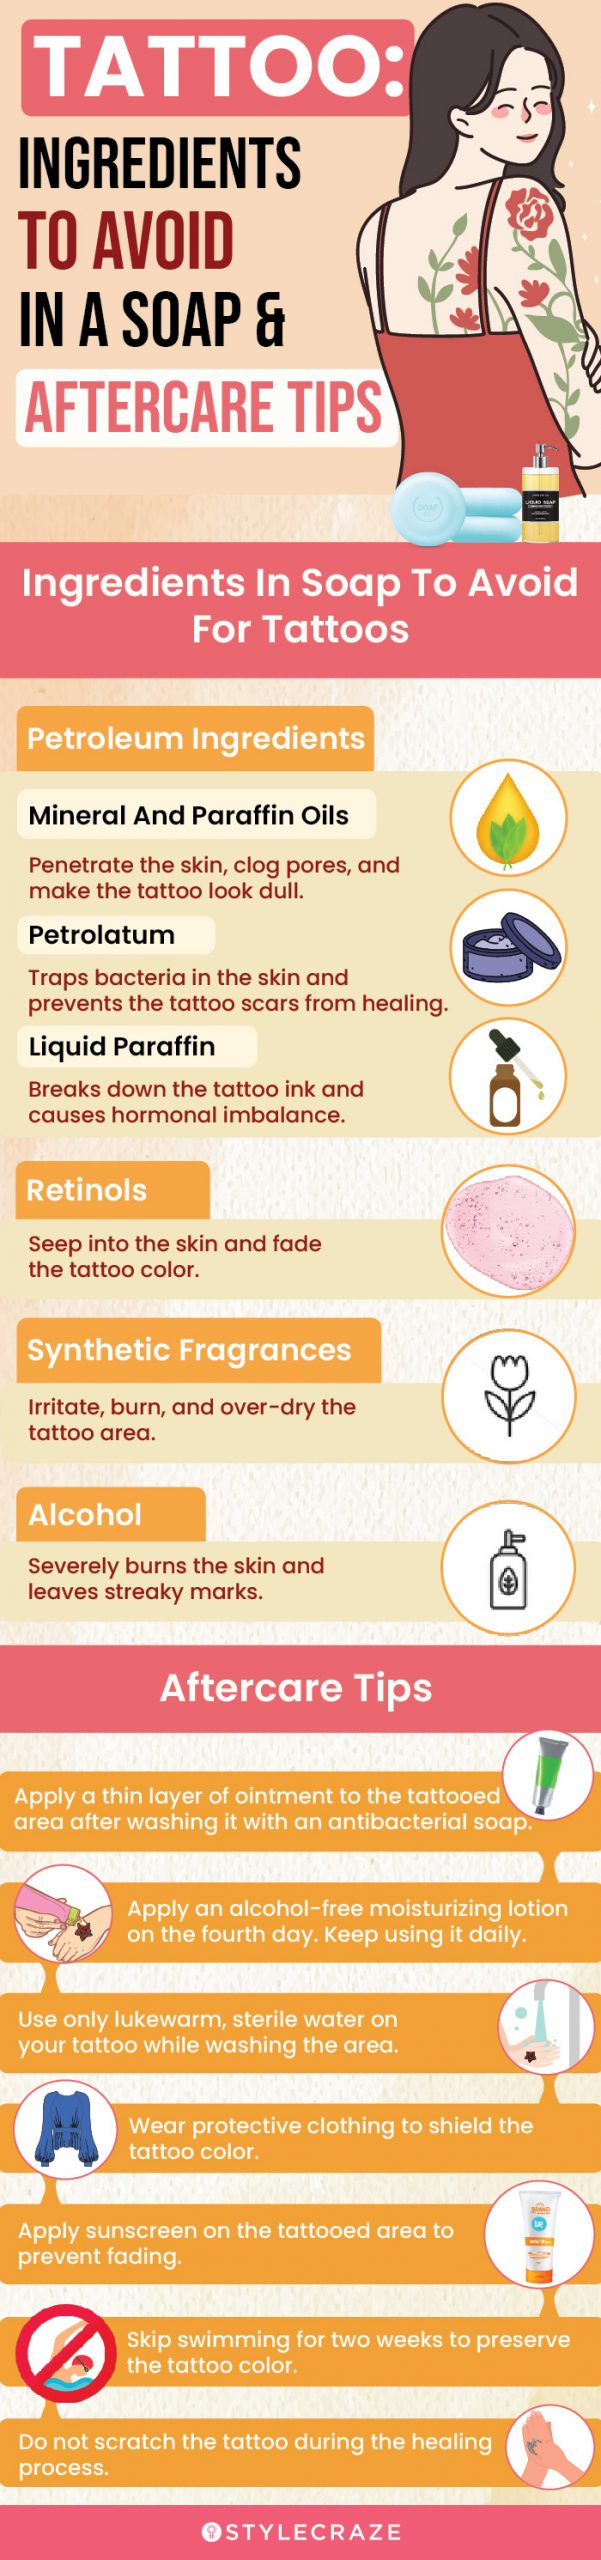 Tattoo: Ingredients To Avoid In A Soap & After Care Tips (infographic)